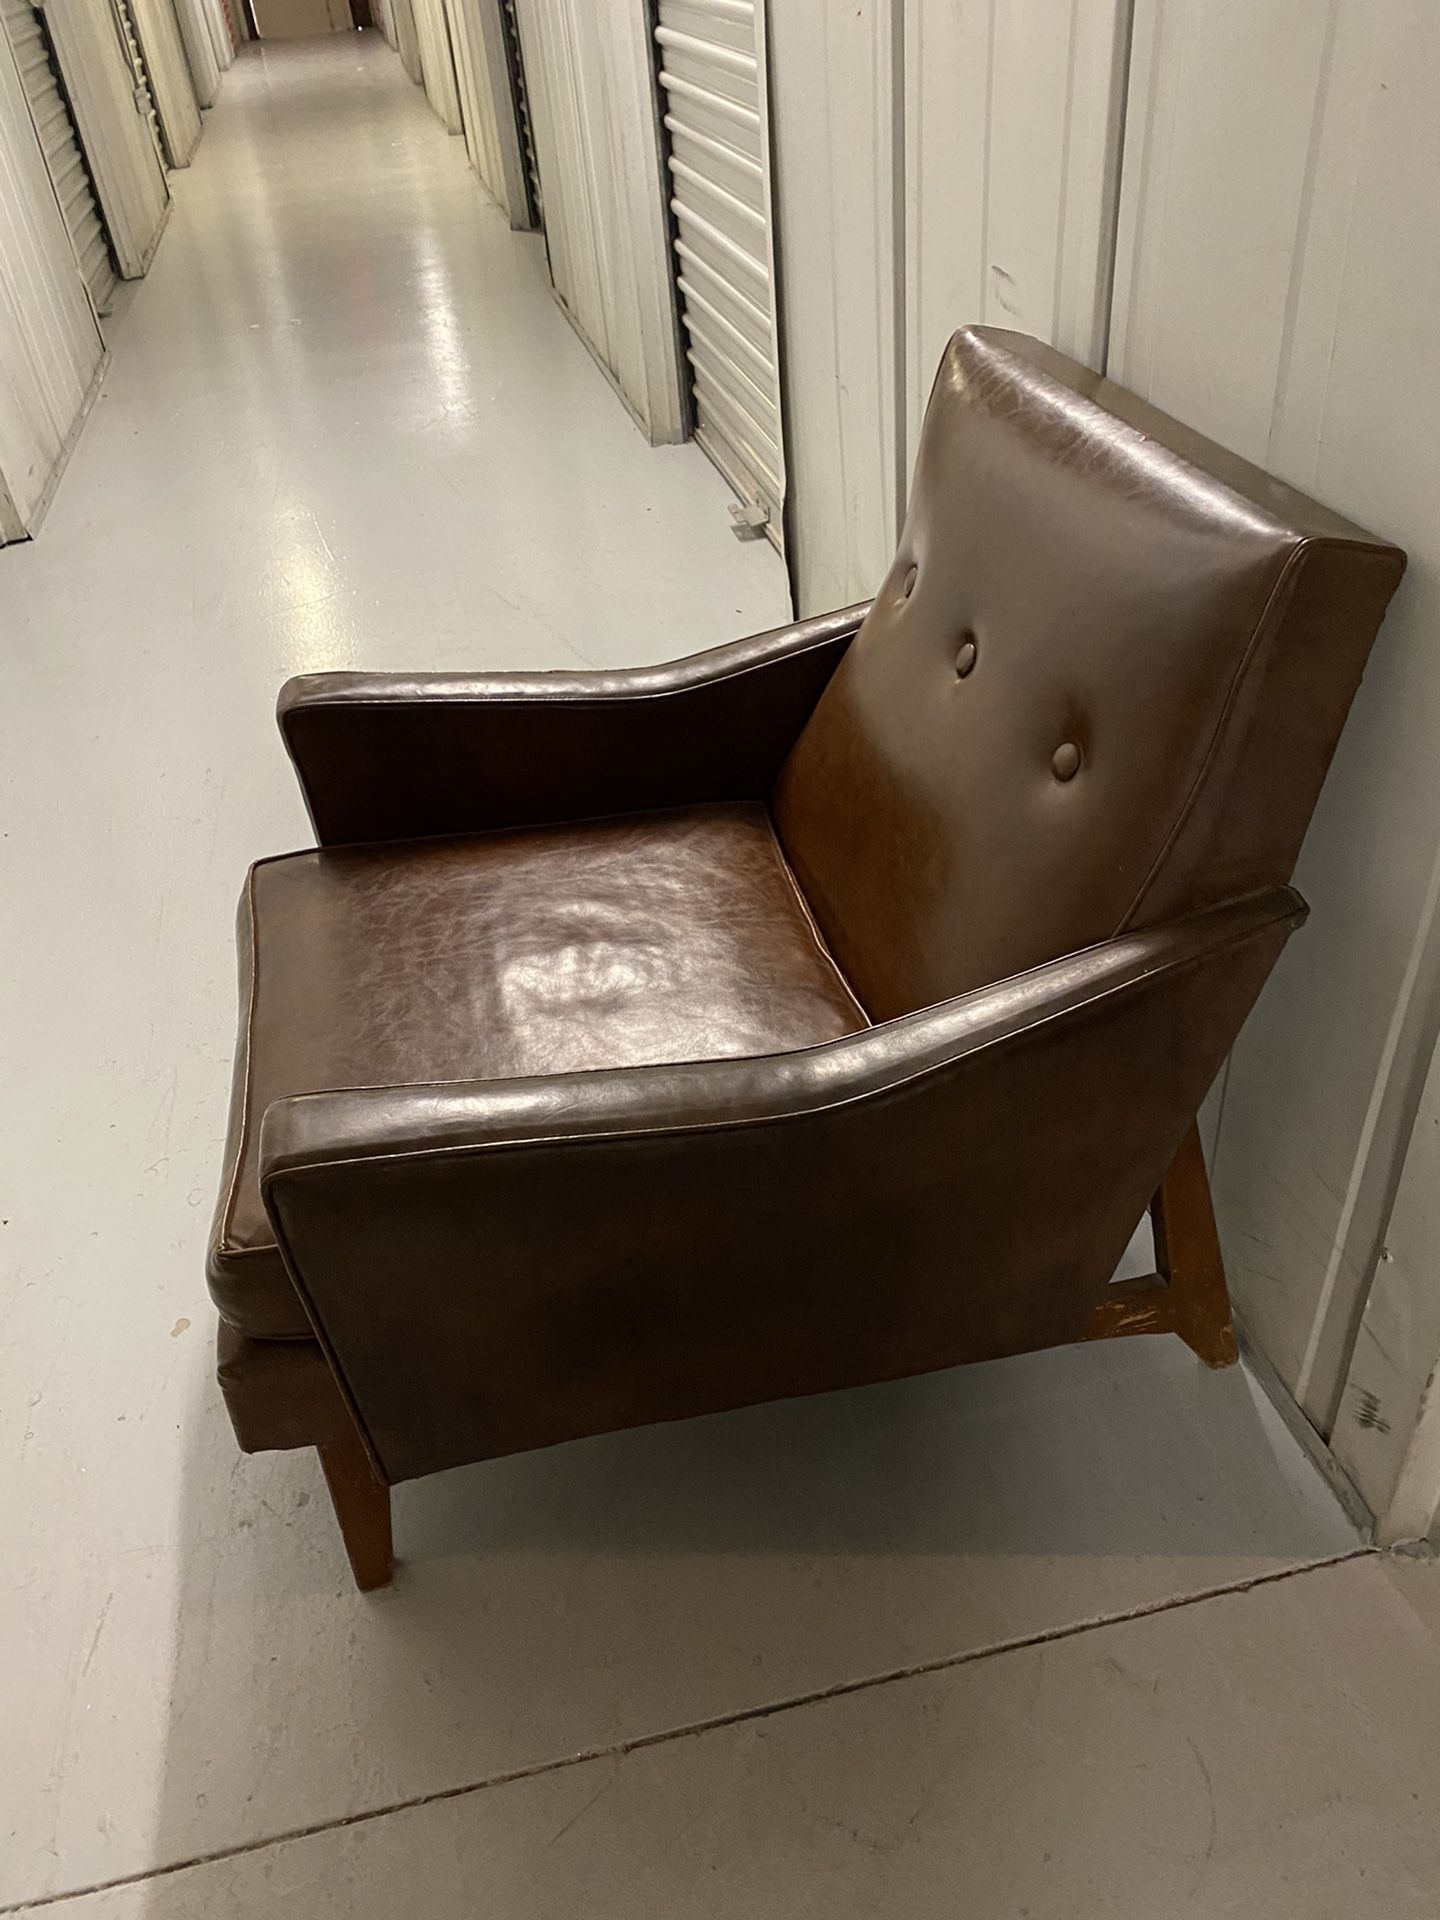 NEW LOW PRICE** Mid Century Modern Chair $125**